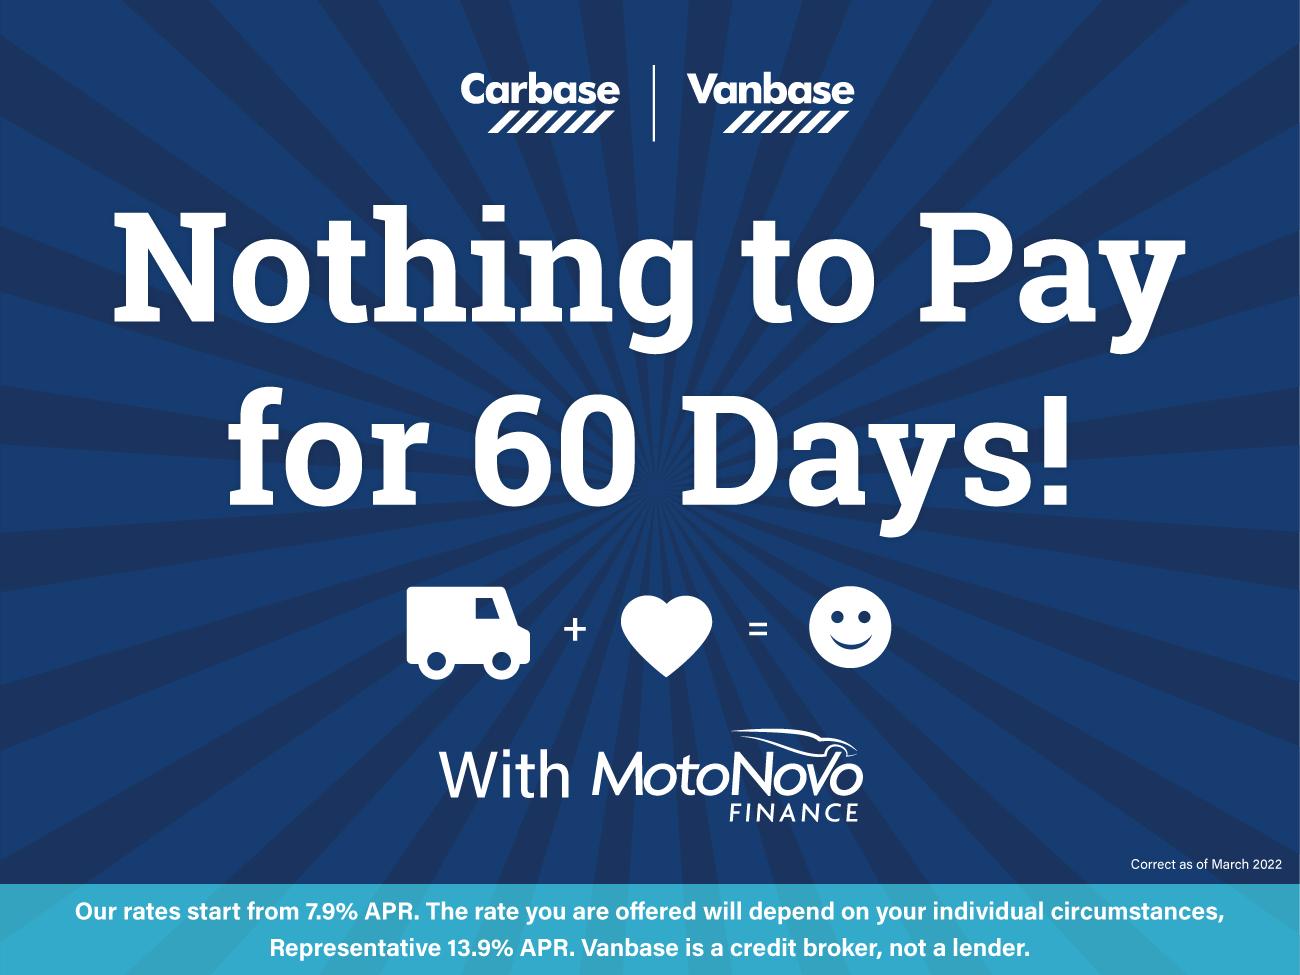 Nothing to pay for 60 days!